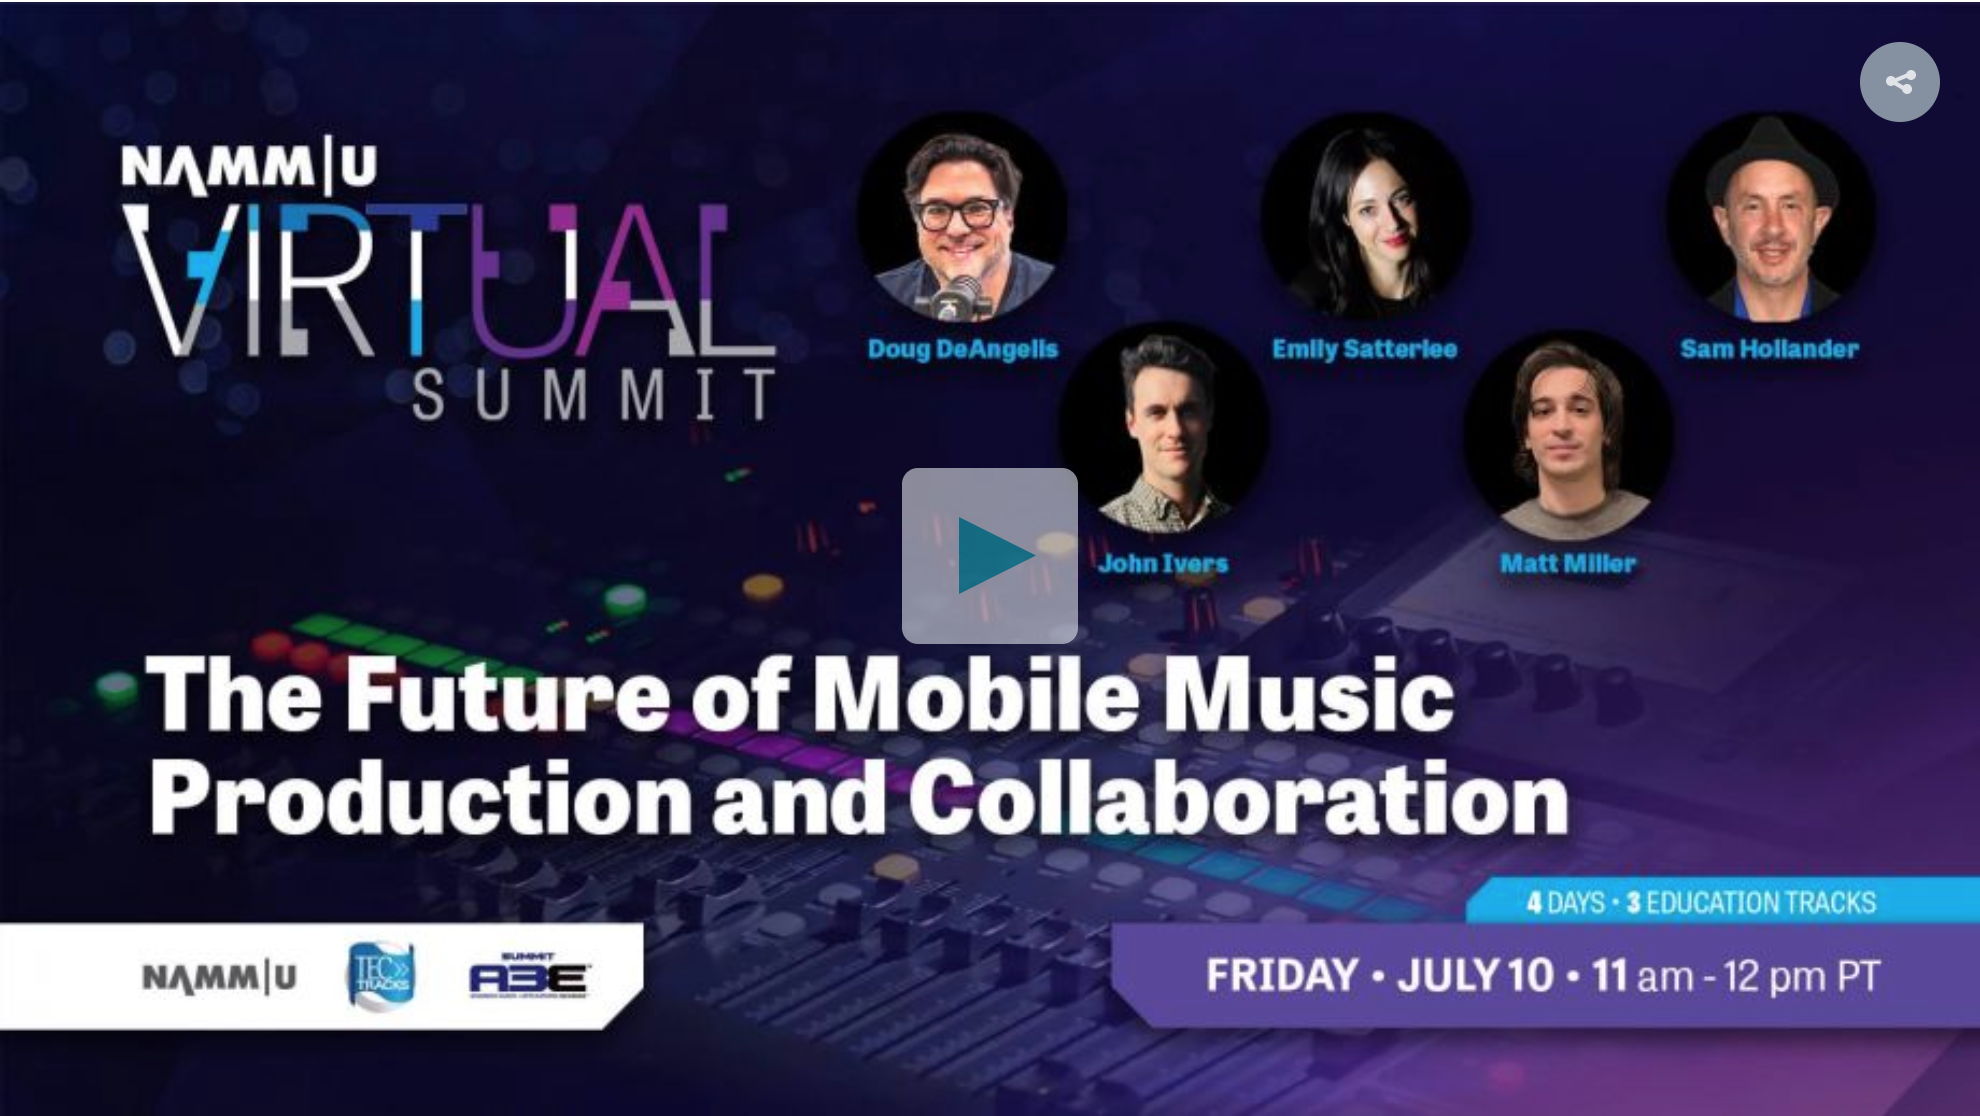 NAMM Virtual Summit - The Future of Mobile Music Production and Collaboration